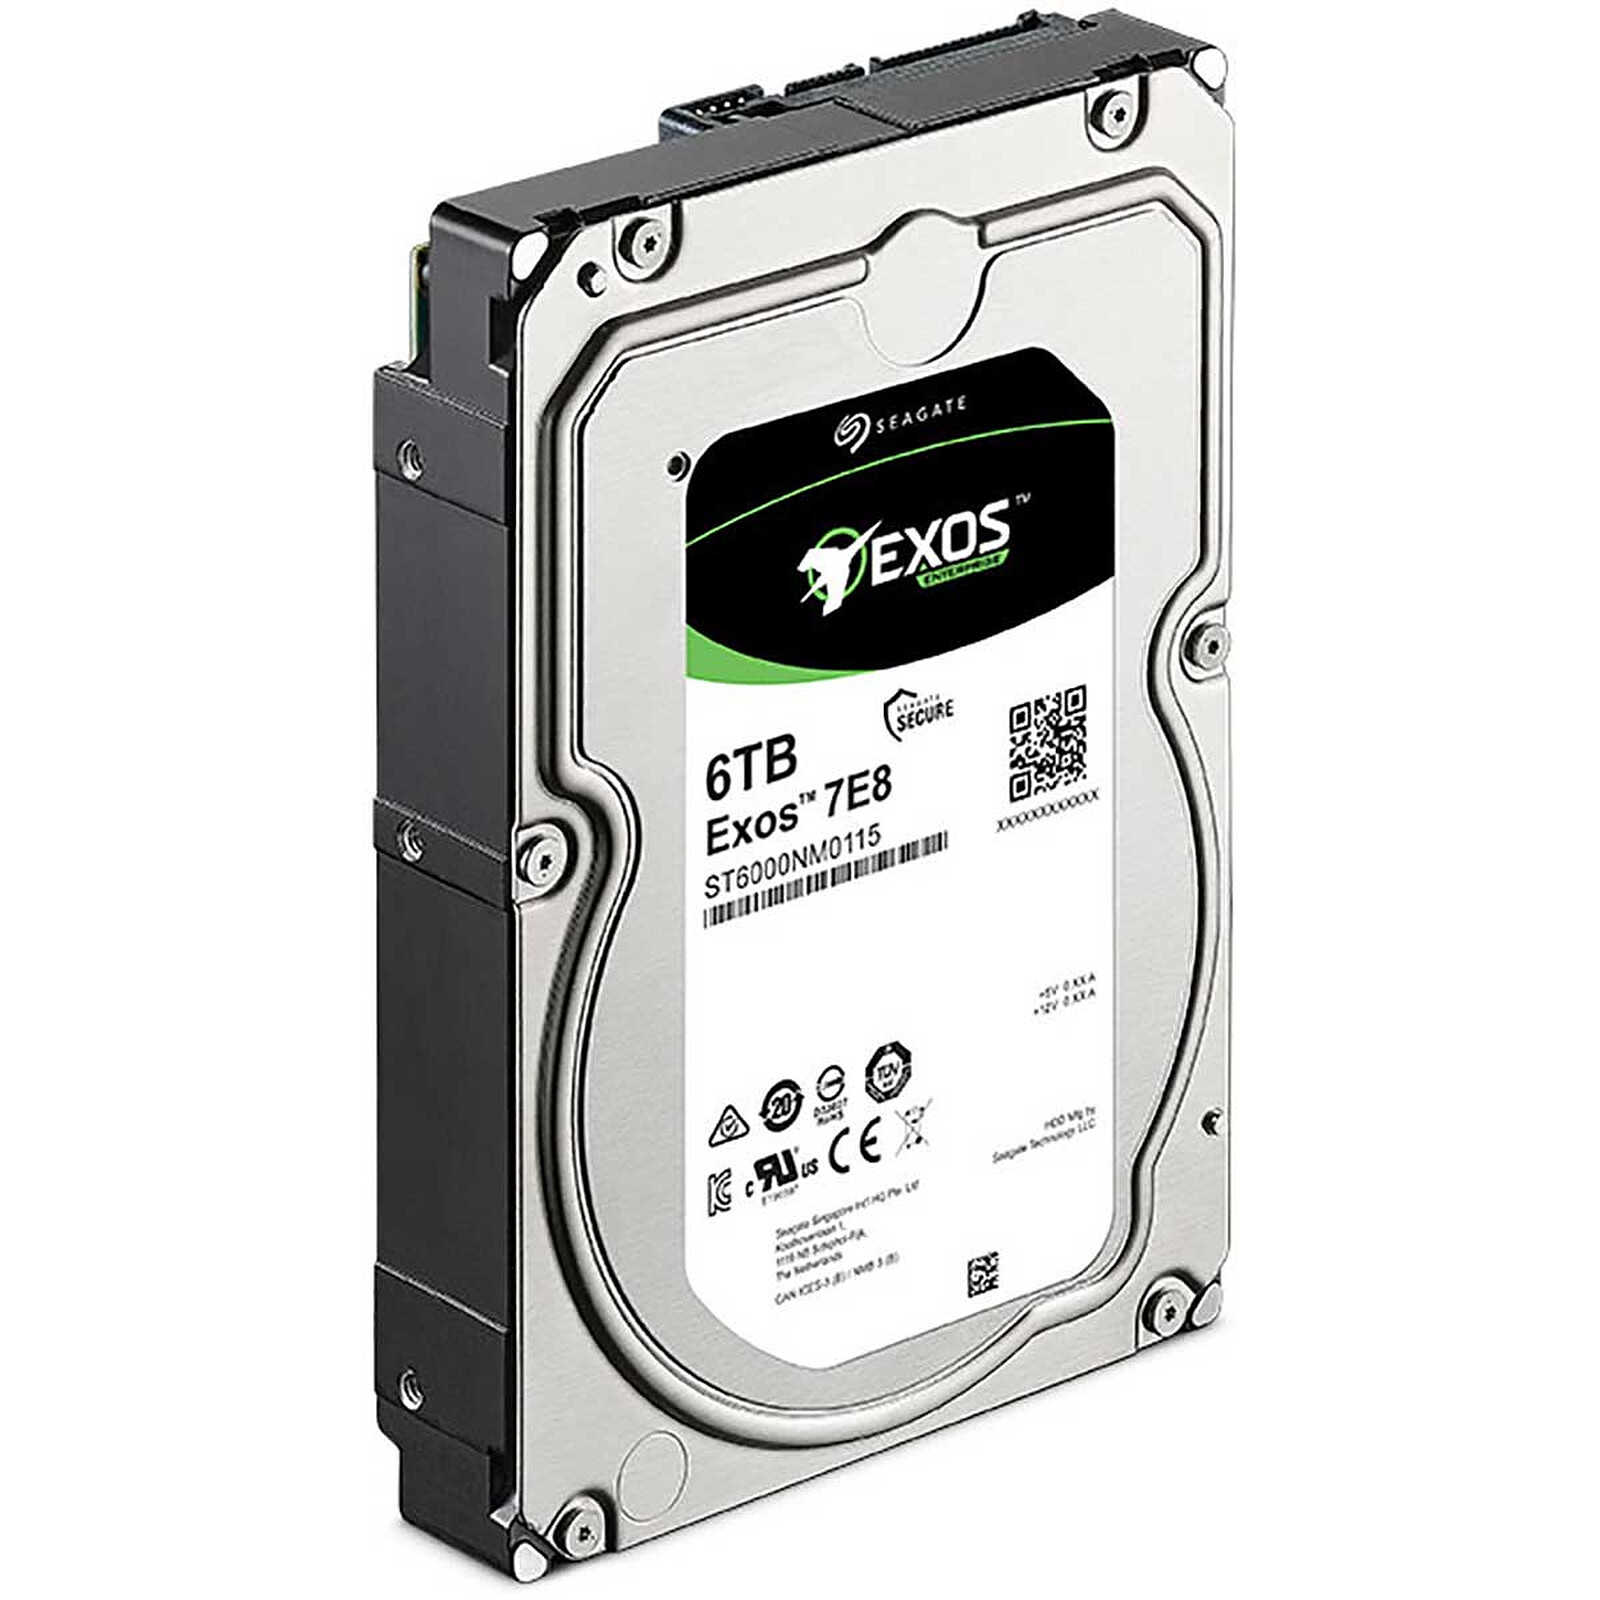 Seagate IronWolf 12 To, Disque dur ST12000VN0008, SATA/600, 24/7